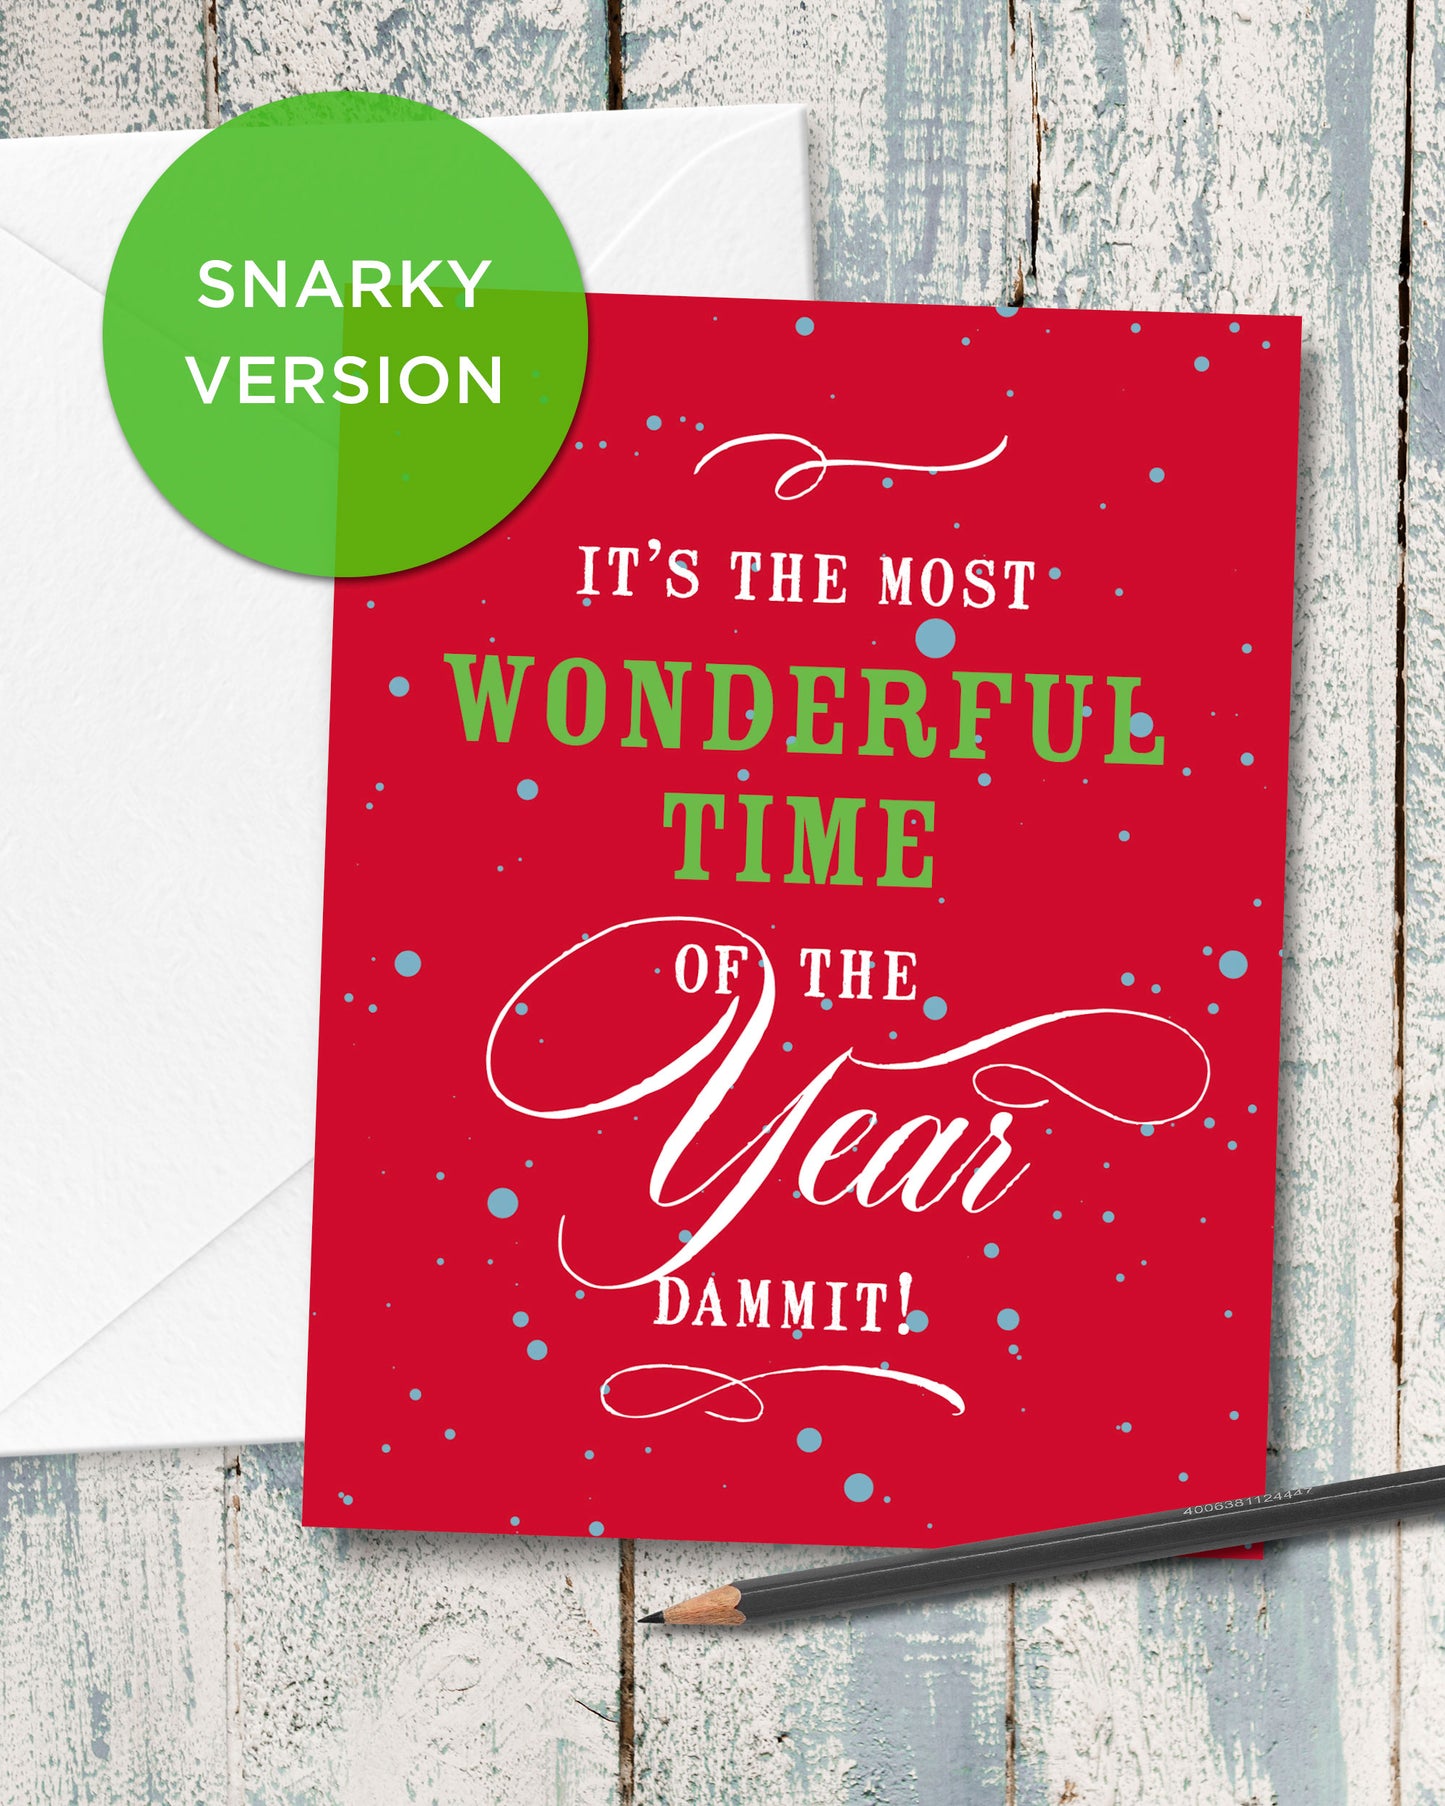 Snarky Christmas Card. It's the Most Wonderful Time of the Year, Dammit. Funny Holiday Cards by Smirkantile.